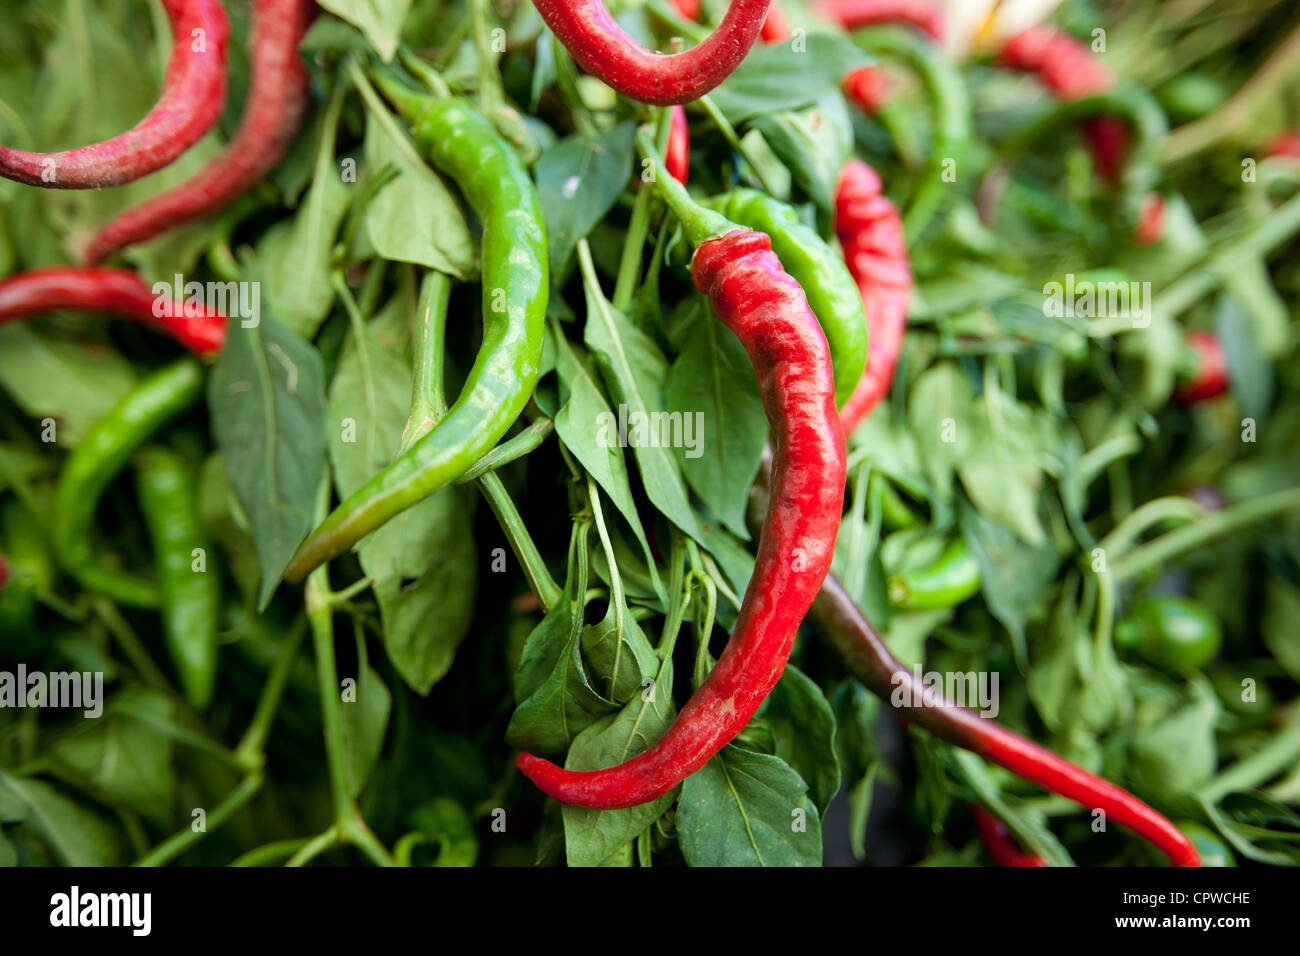 Red and green chili peppers, Capsicum pubescens, on sale in food market in Pienza, Tuscany, Italy Stock Photo